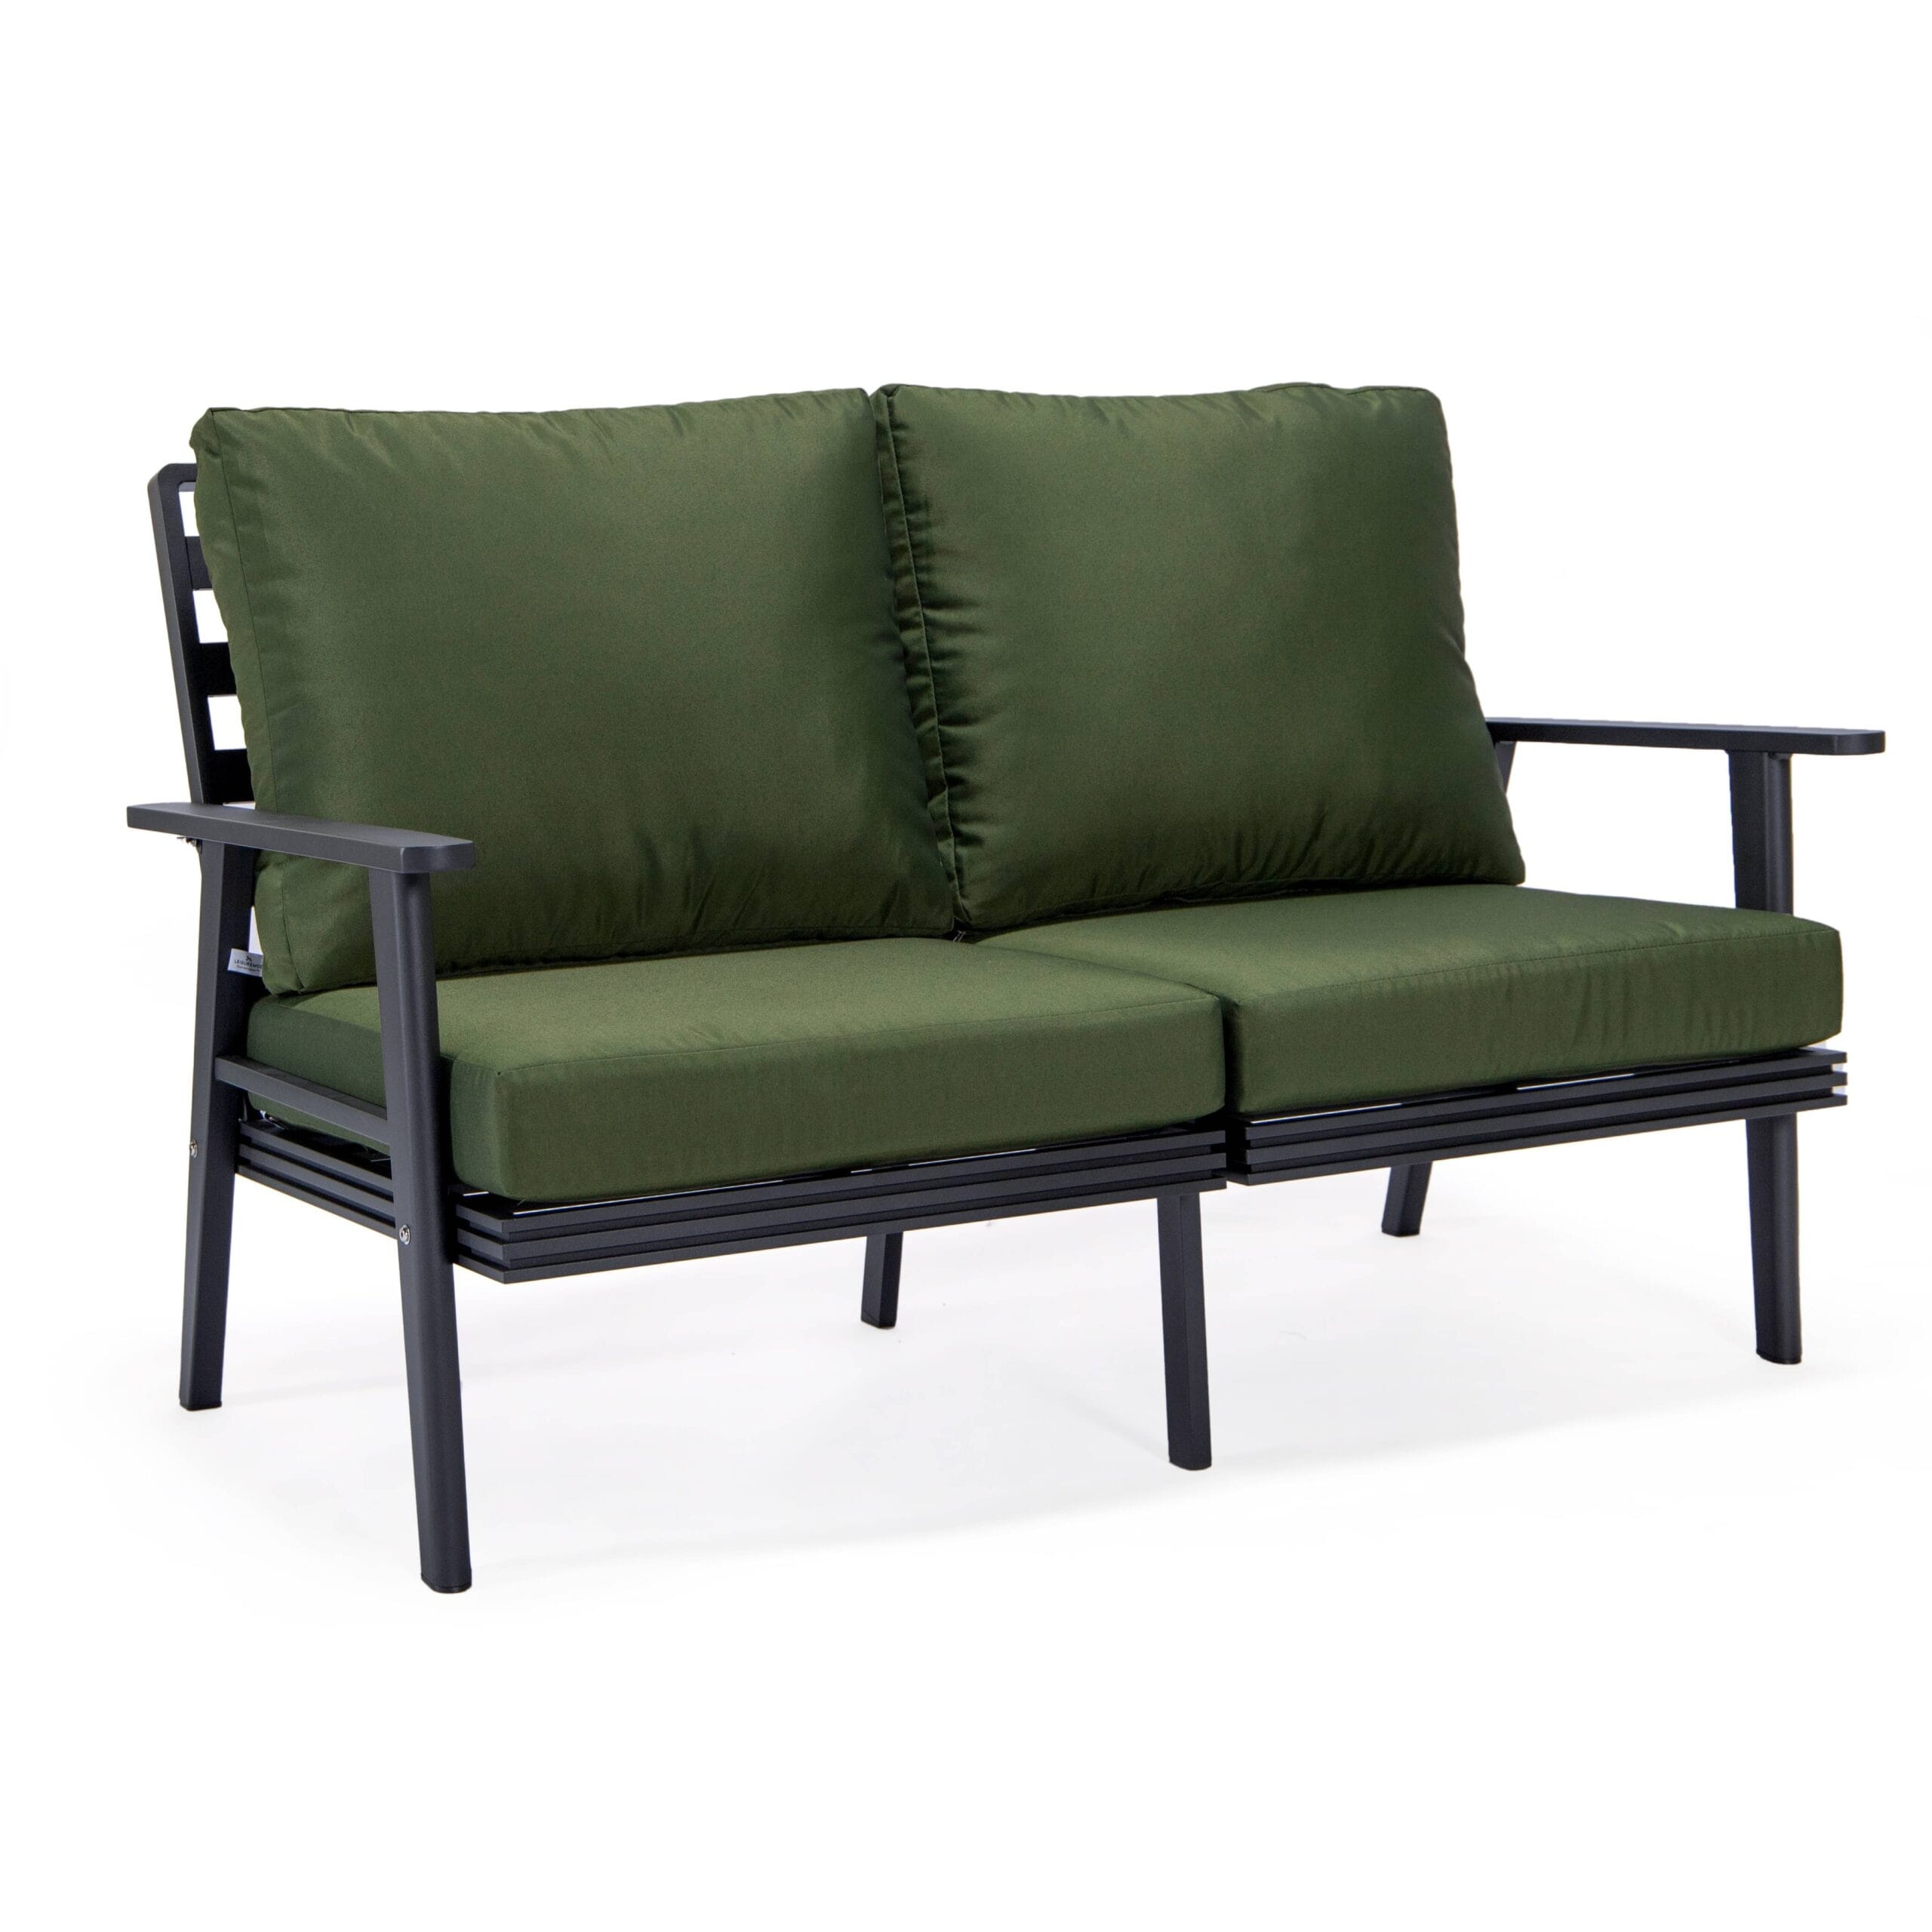 Leisuremod Walbrooke Patio Loveseat With Black Aluminum Frame And Removable Cushions - 56.69